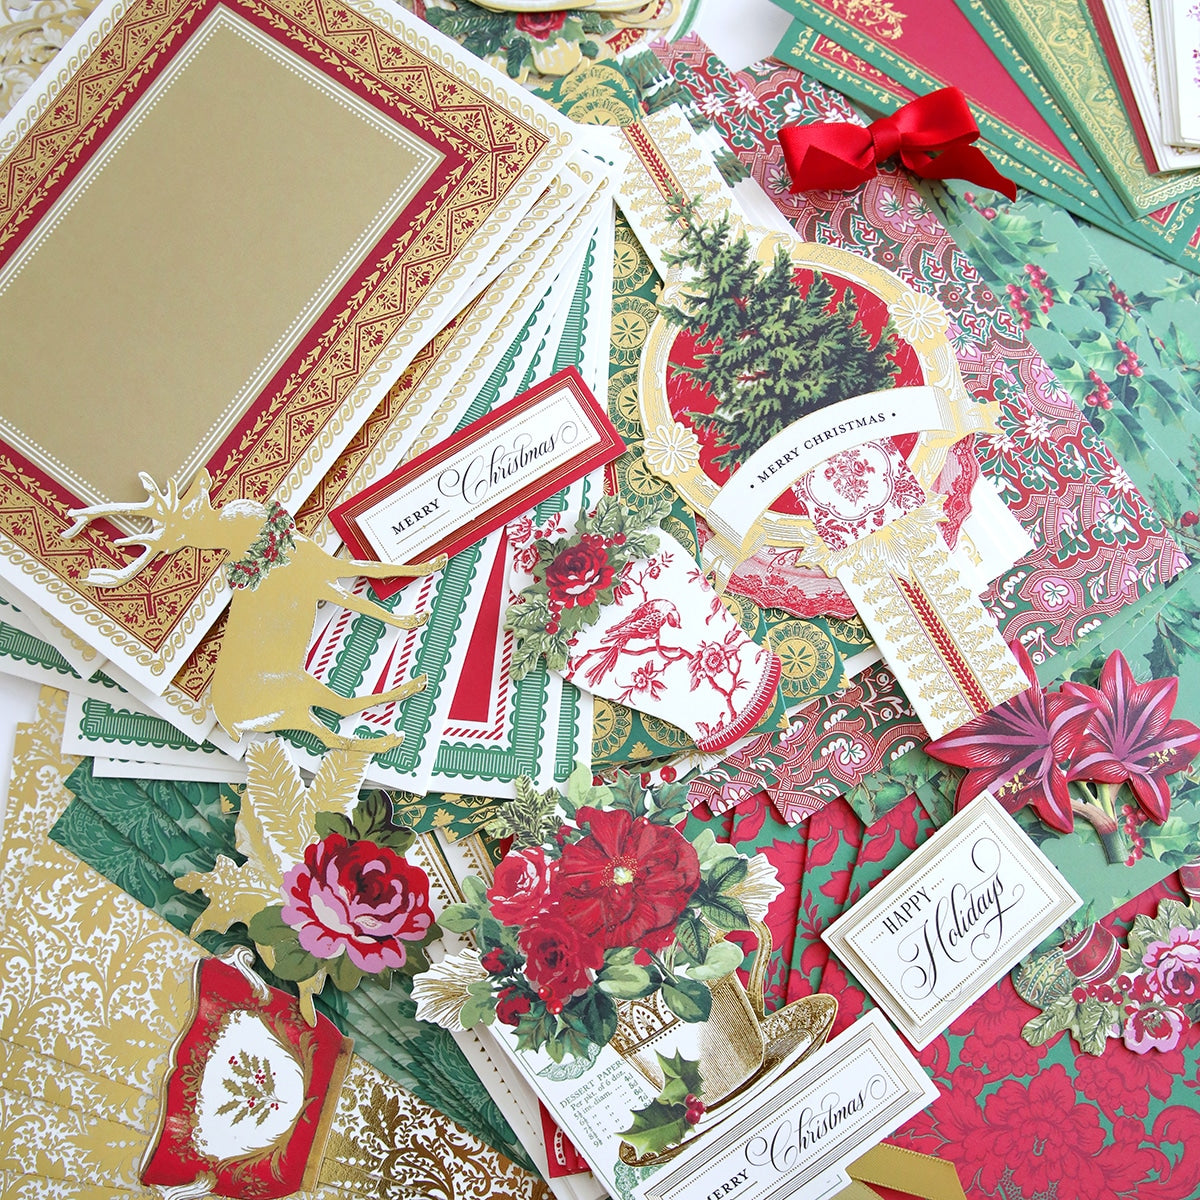 A pile of Christmas Wishes Card Making Kit on a table.